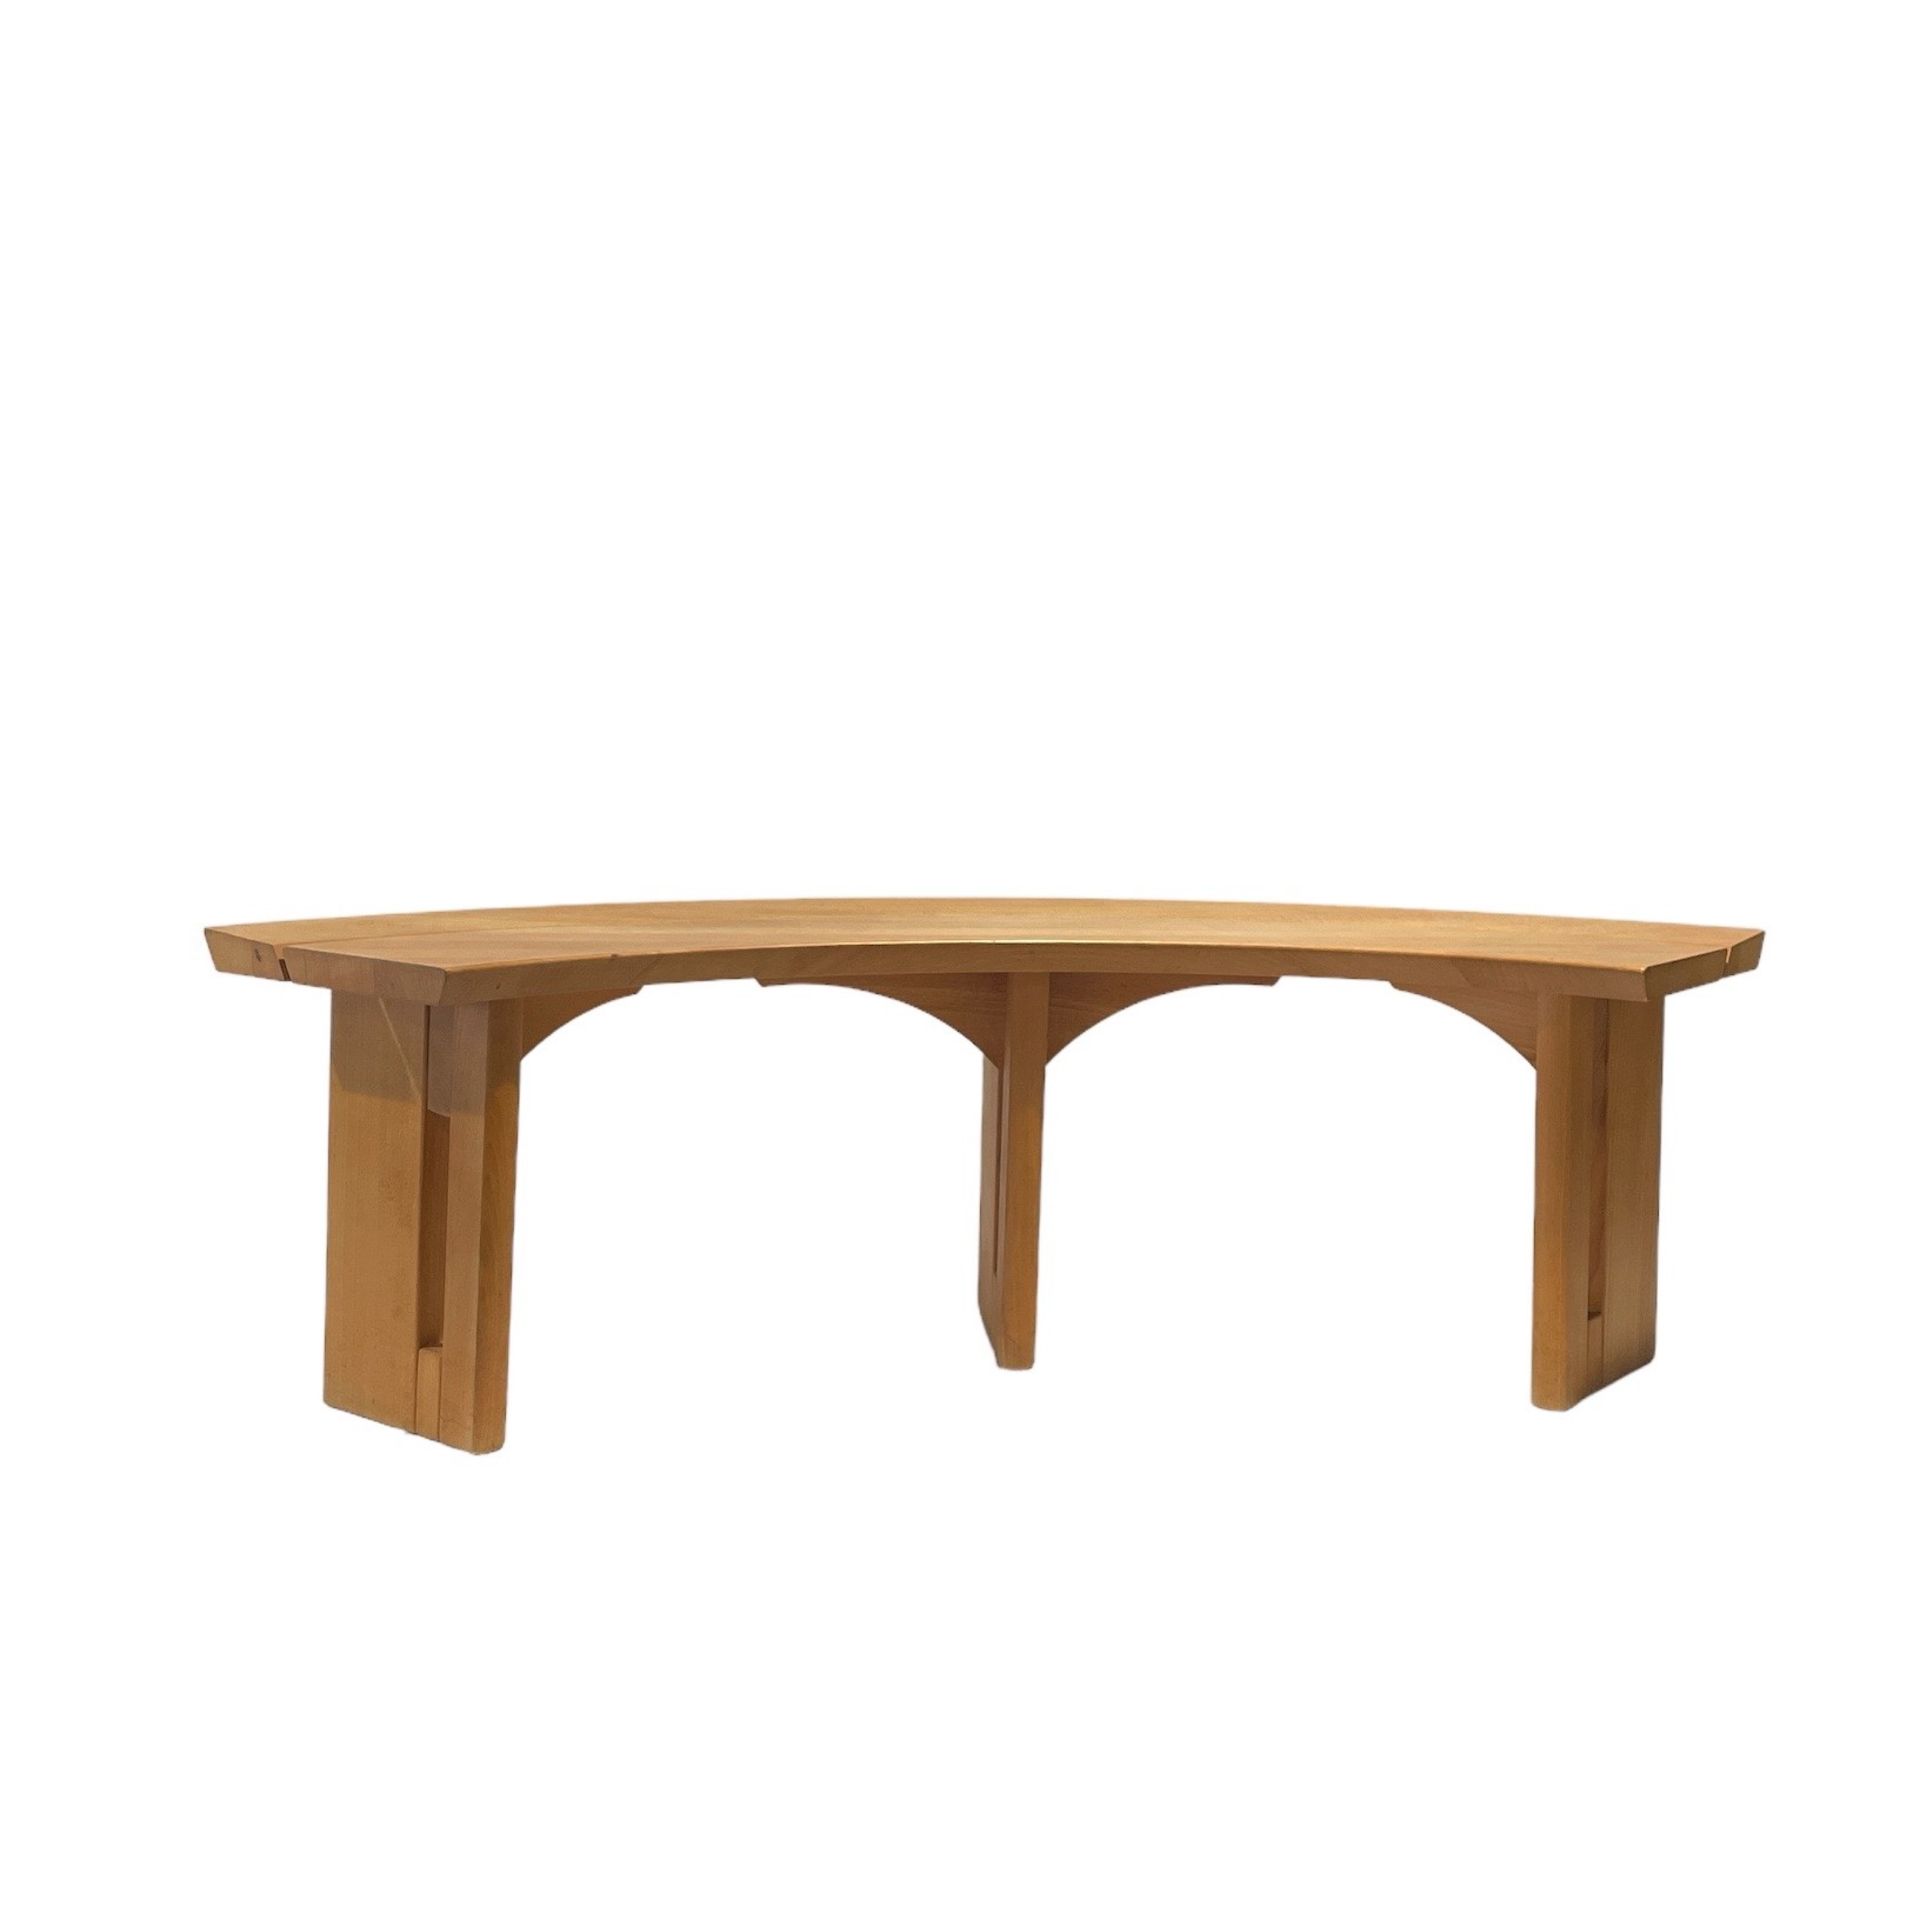 PIERRE CHAPO (1927-1986) Set of a table, 2 benches and 3 chairs in solid elm - Image 5 of 6